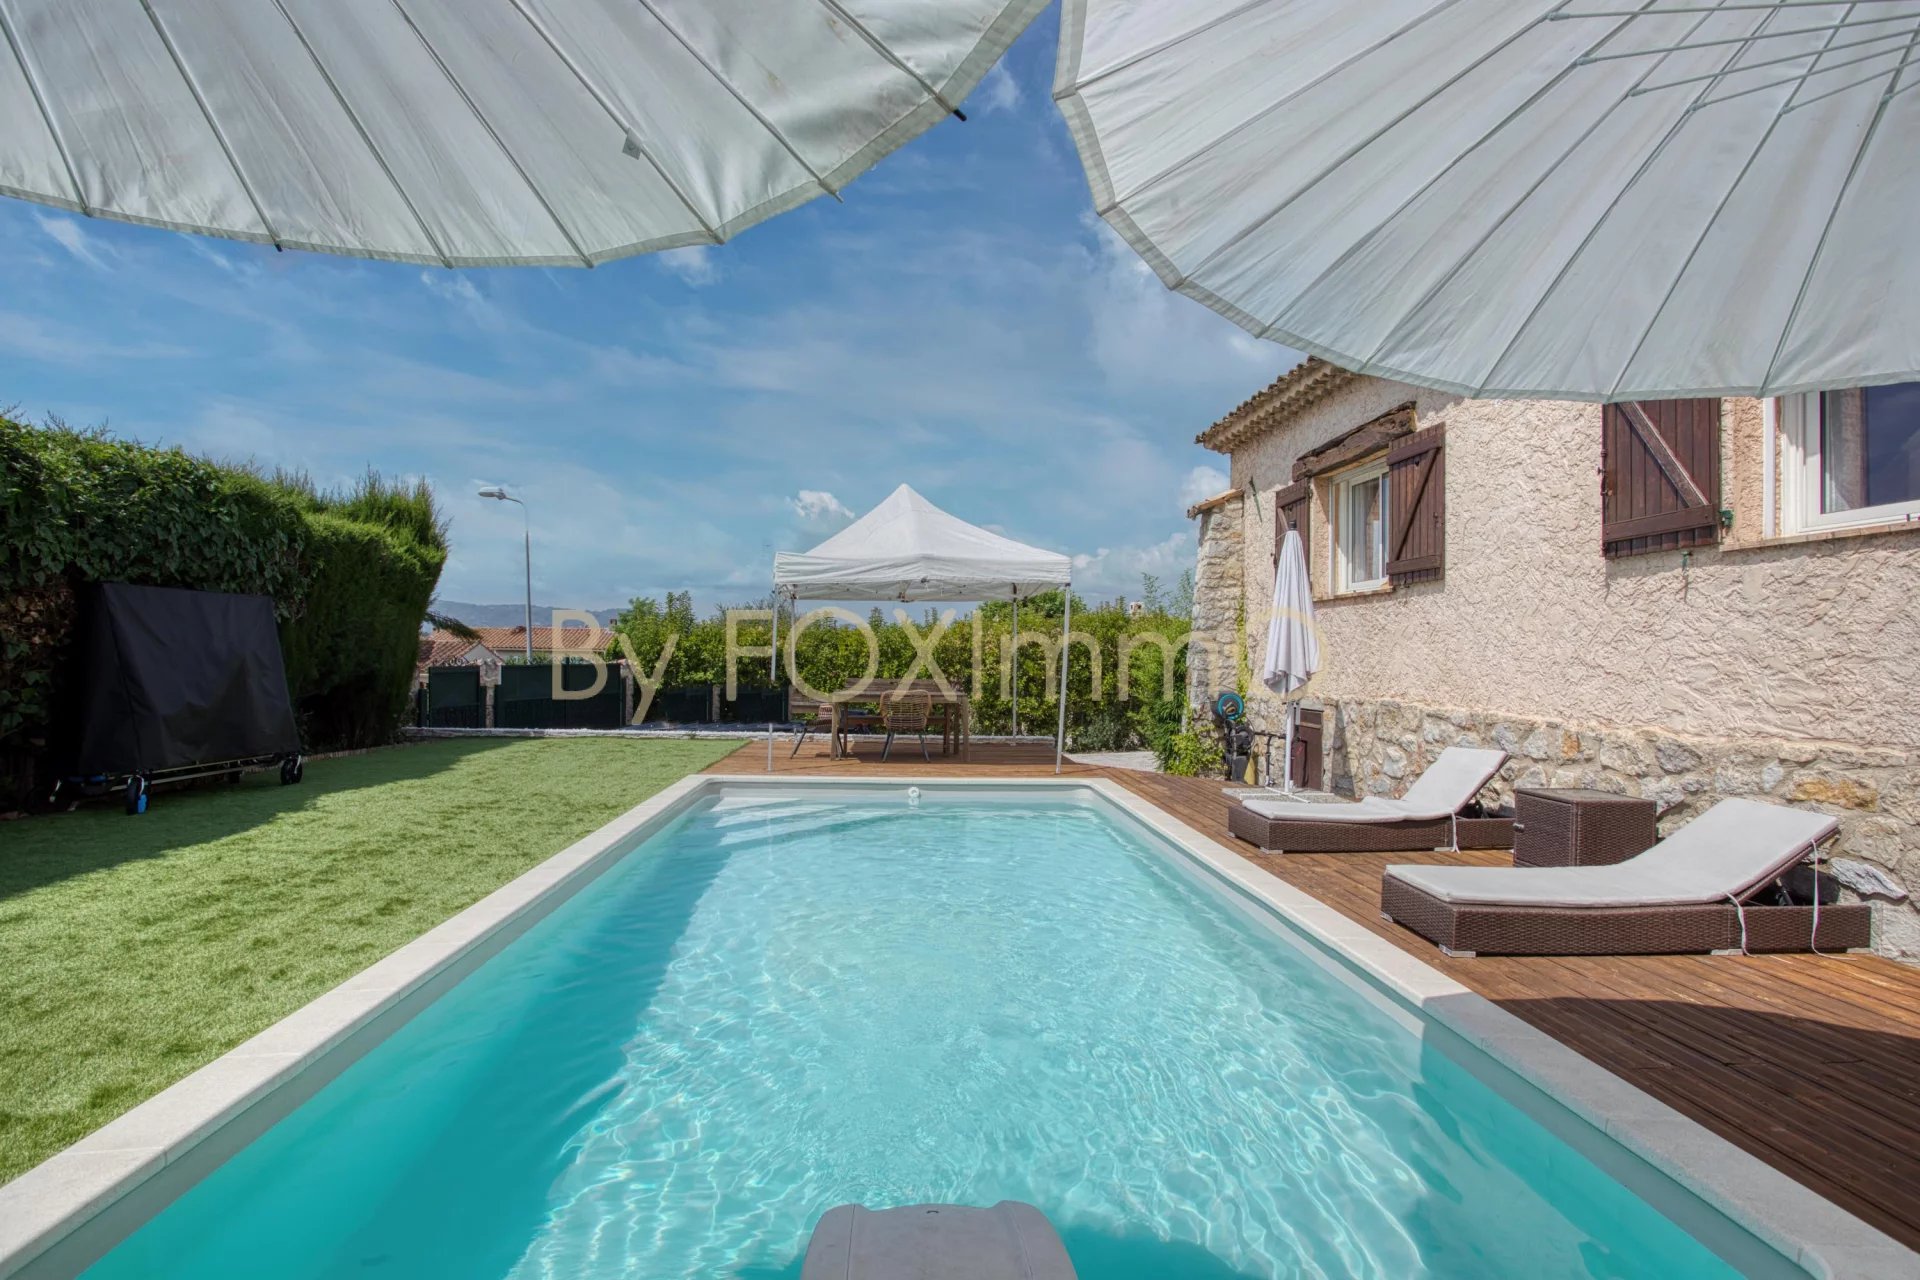 Detached single-storey villa for sale in absolute peace and quiet with swimming pool and 2P detached house